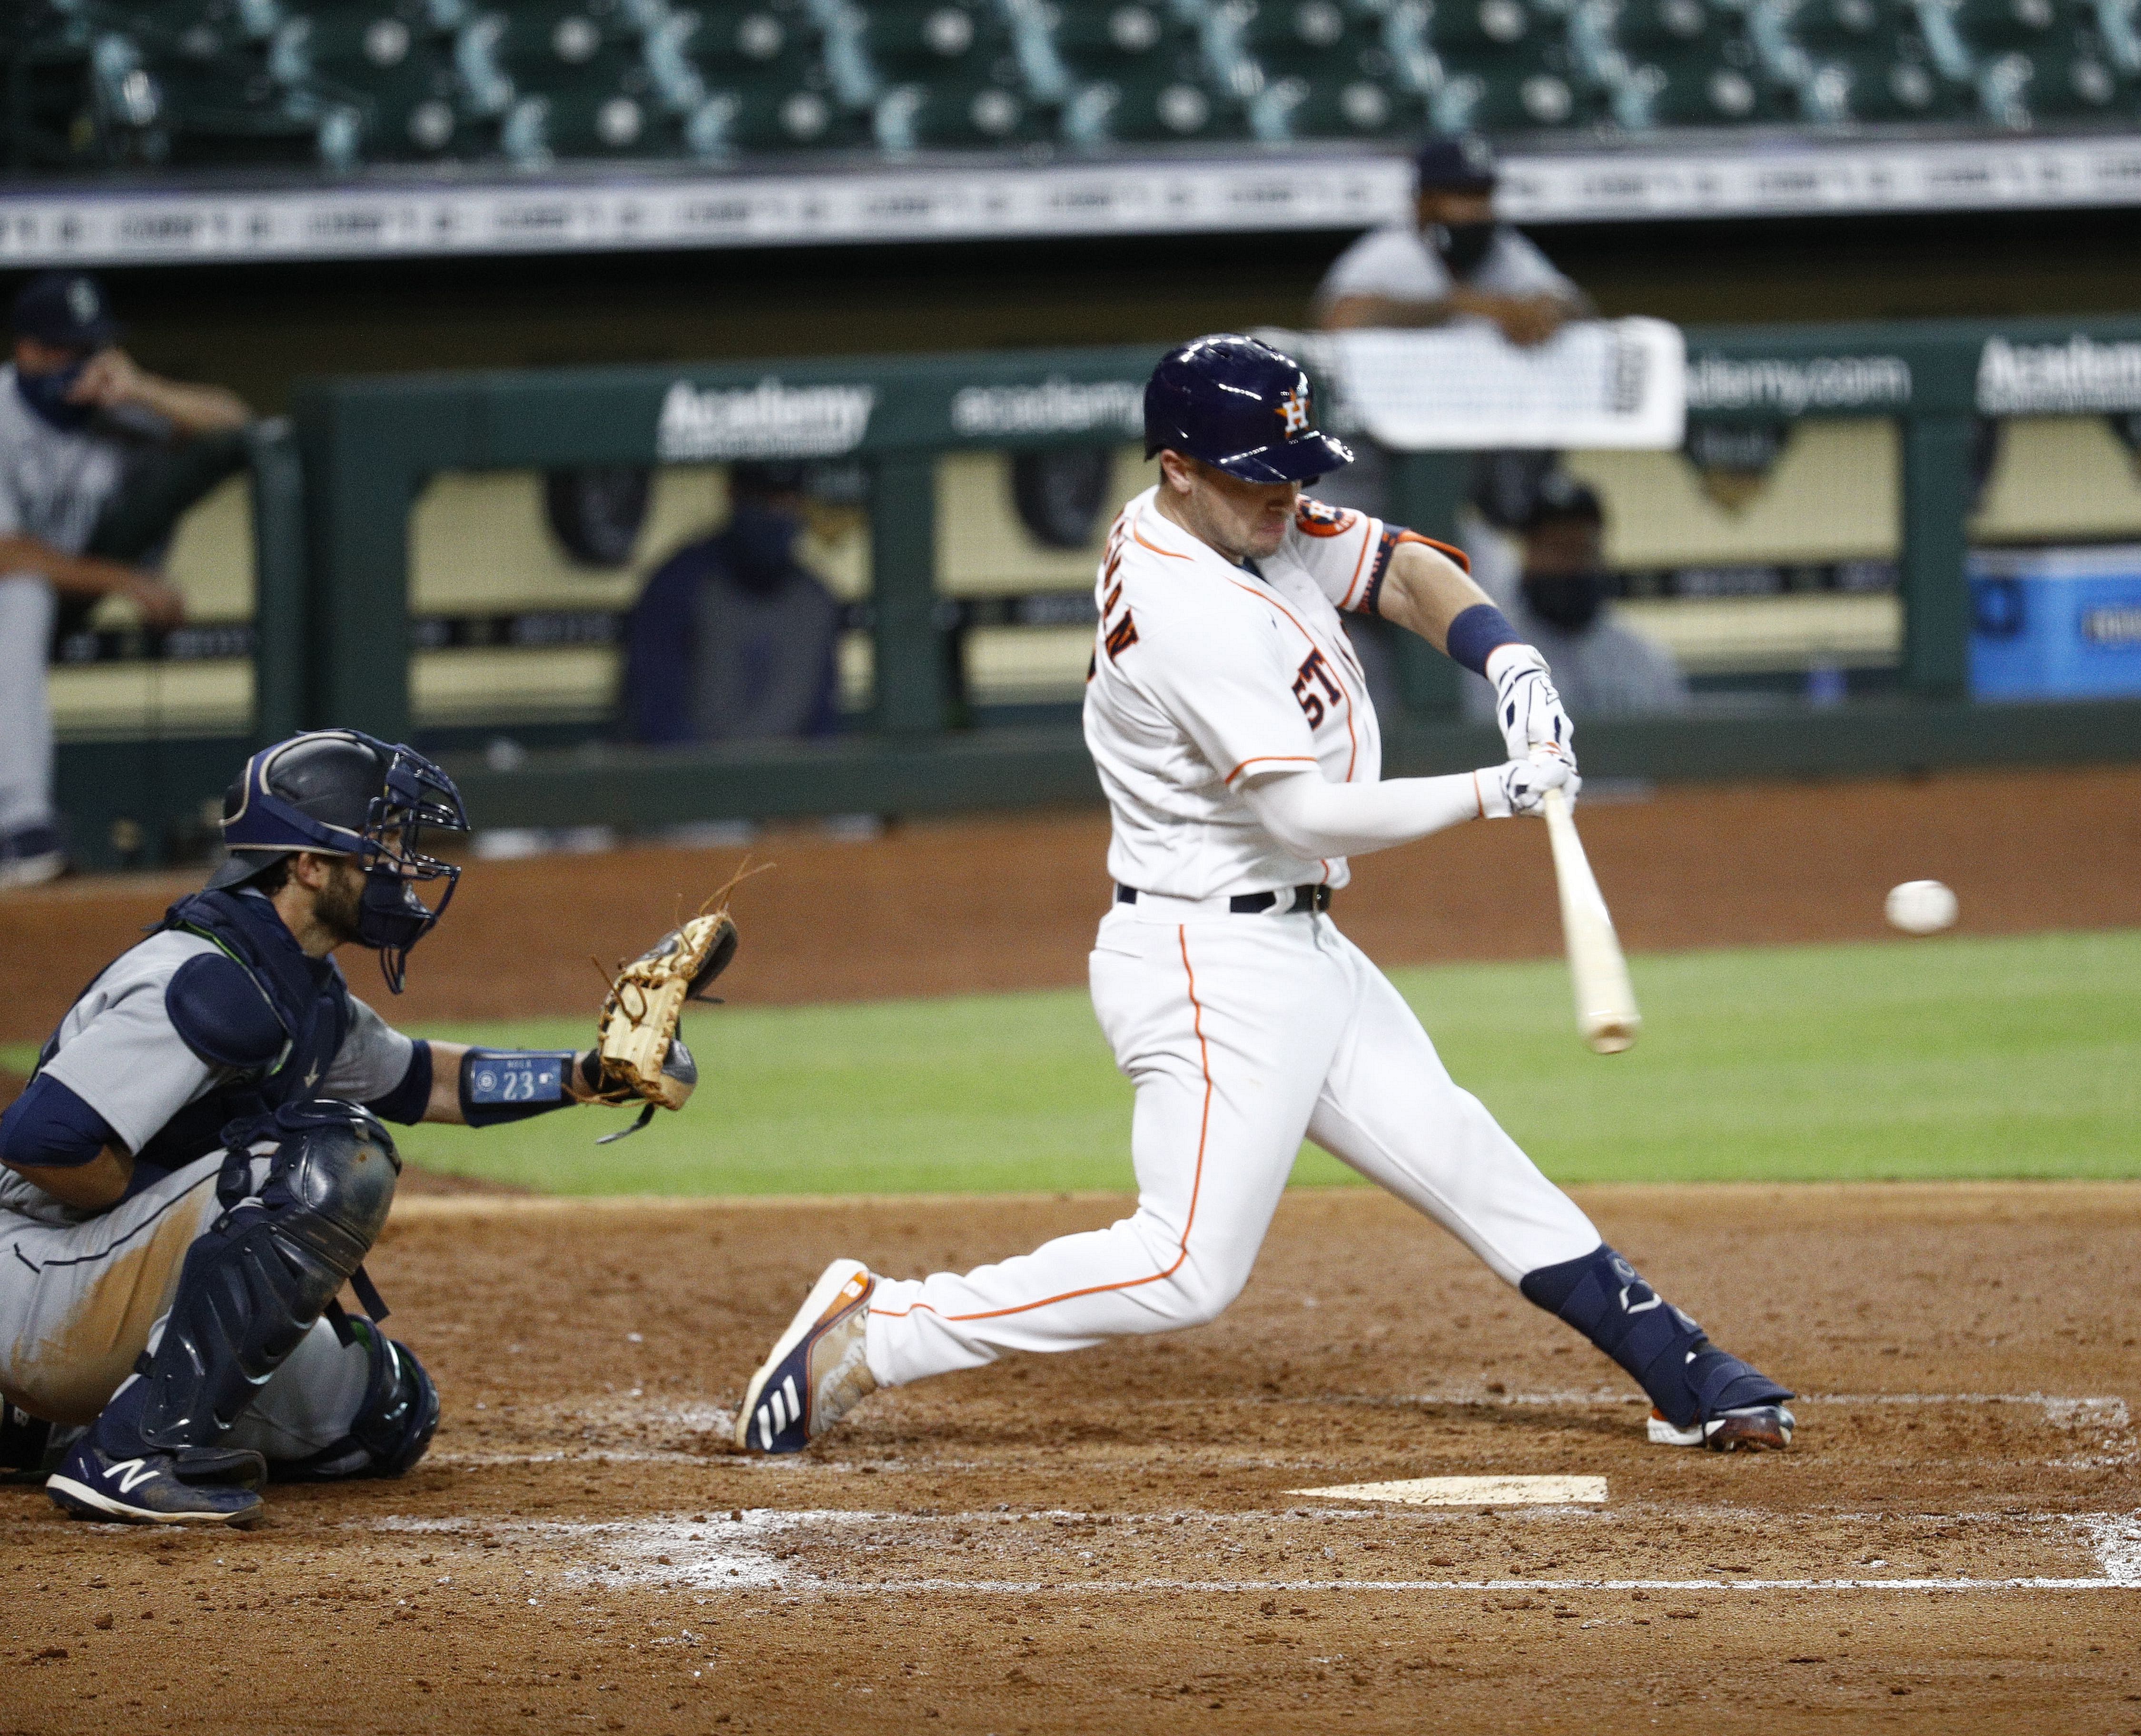 Alex Bregman's 100th career home run Monday night was exactly 100 mph, MLB  official says